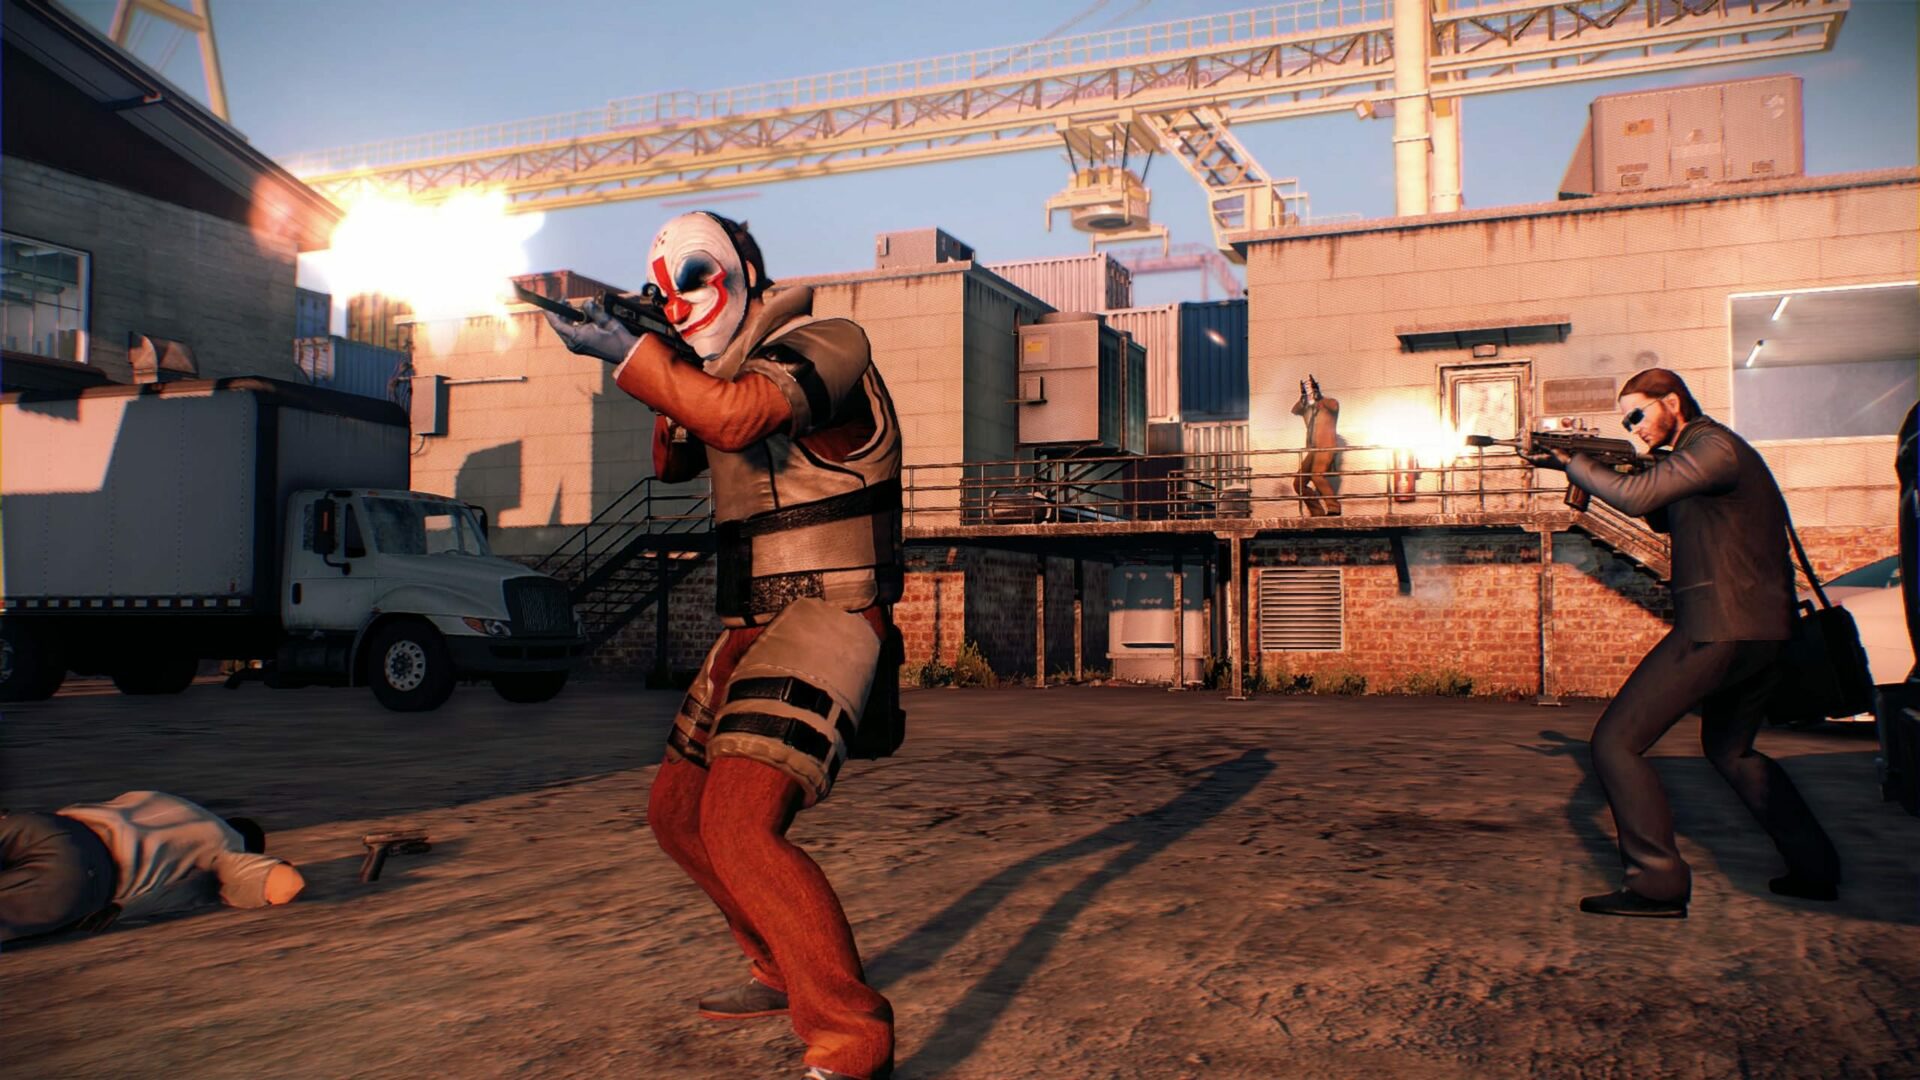 Payday 2 game. Payday игра. Пейдей 2. Игра payday 2. Crimewave Edition. Payday 2 Xbox one.